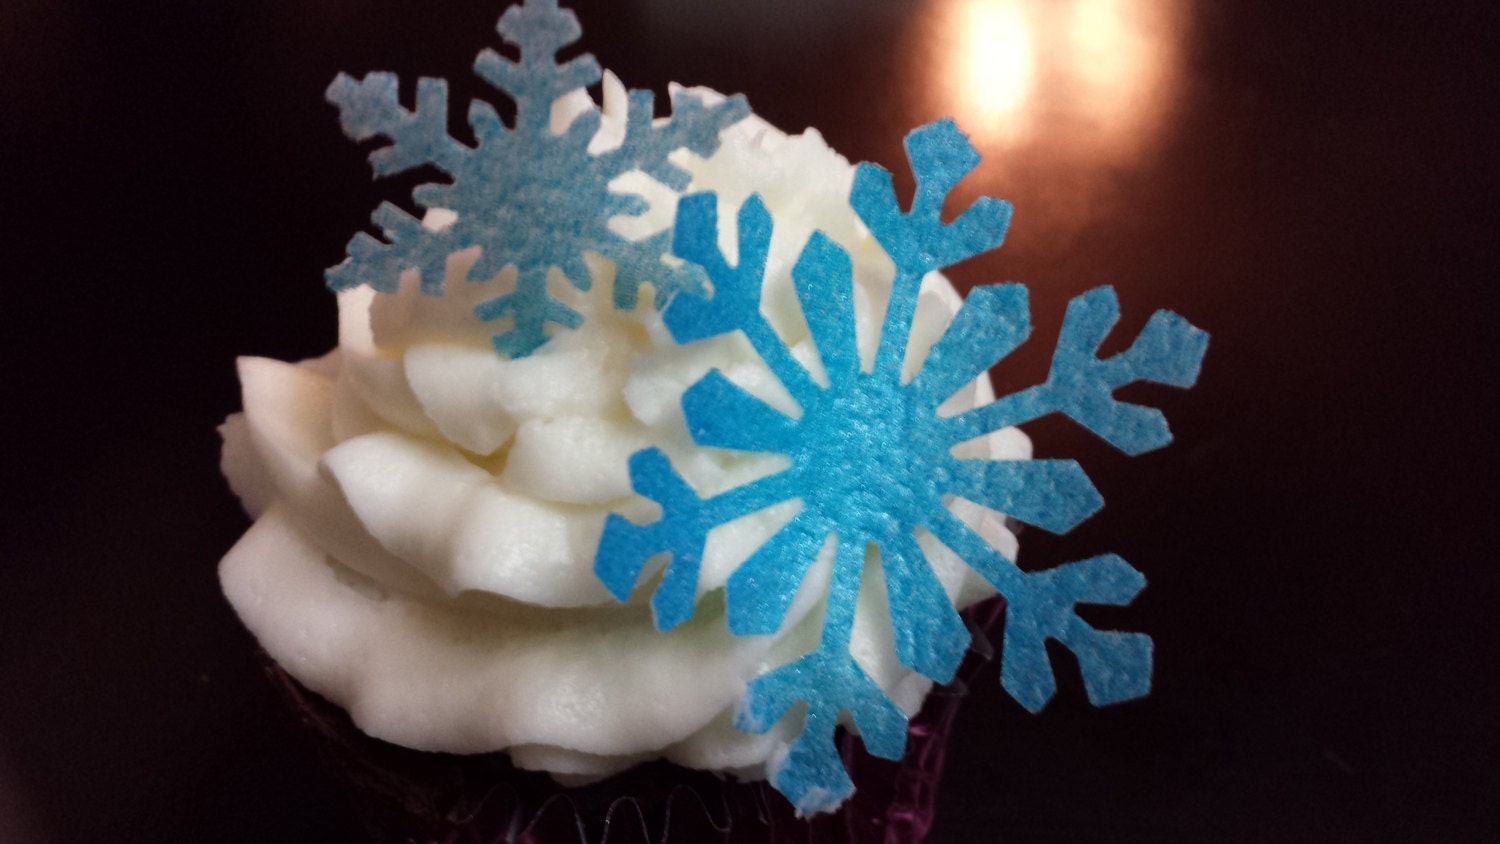 Edible Whisky Infused Snowflakes